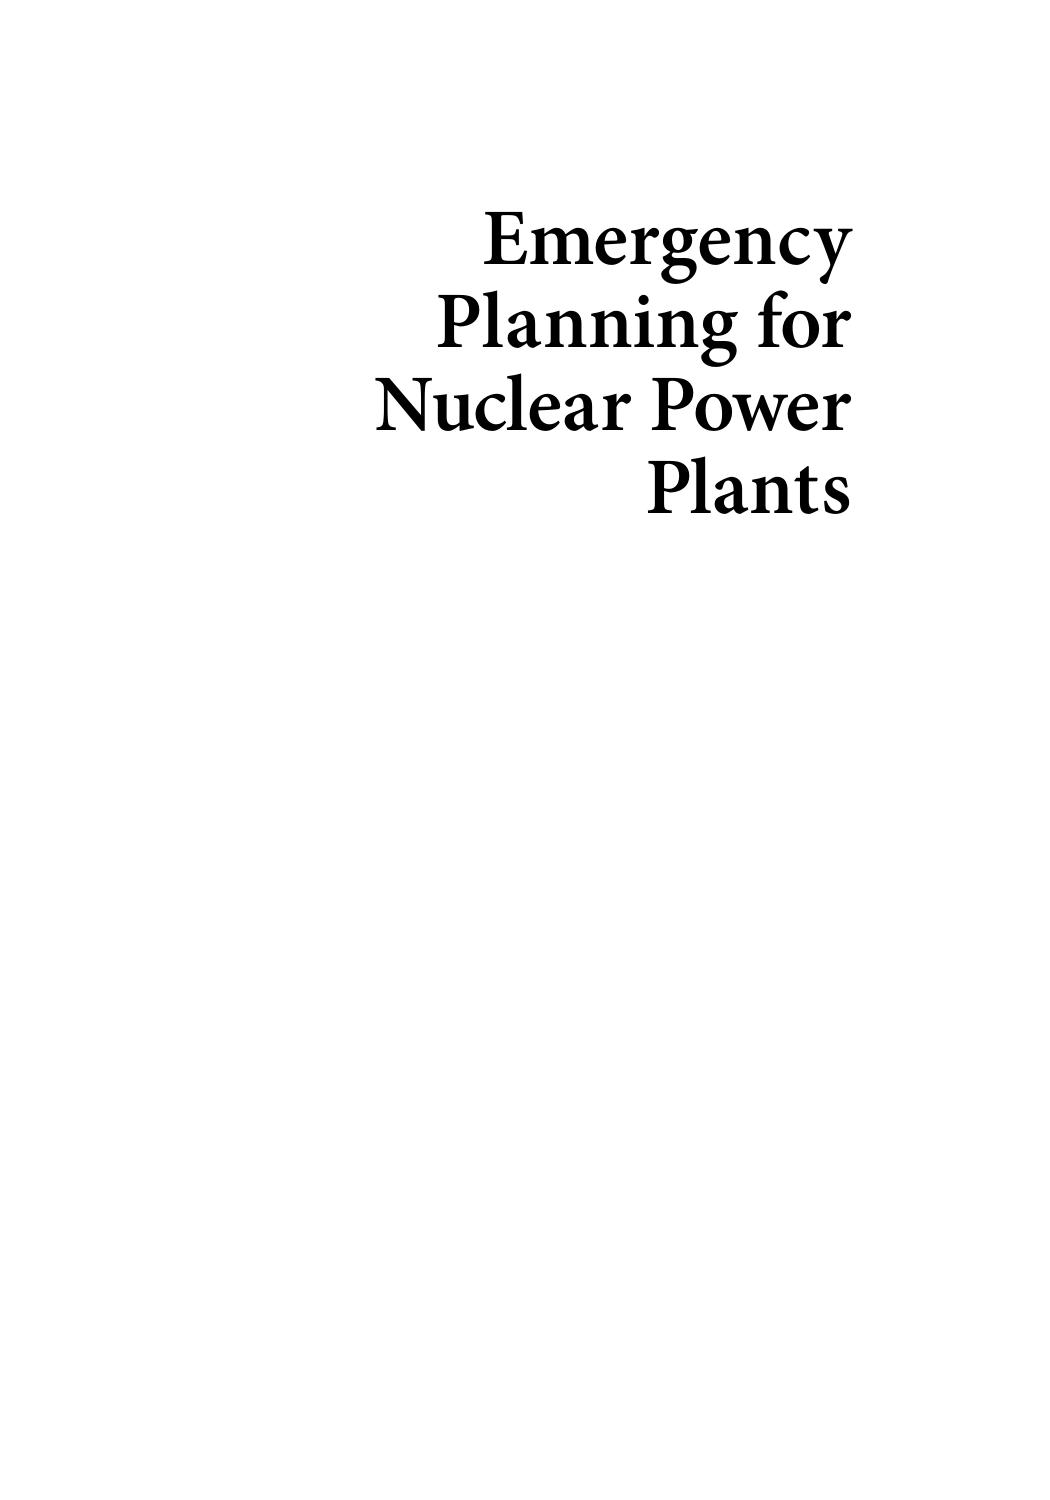 Emergency planning for nuclear power plants 2017